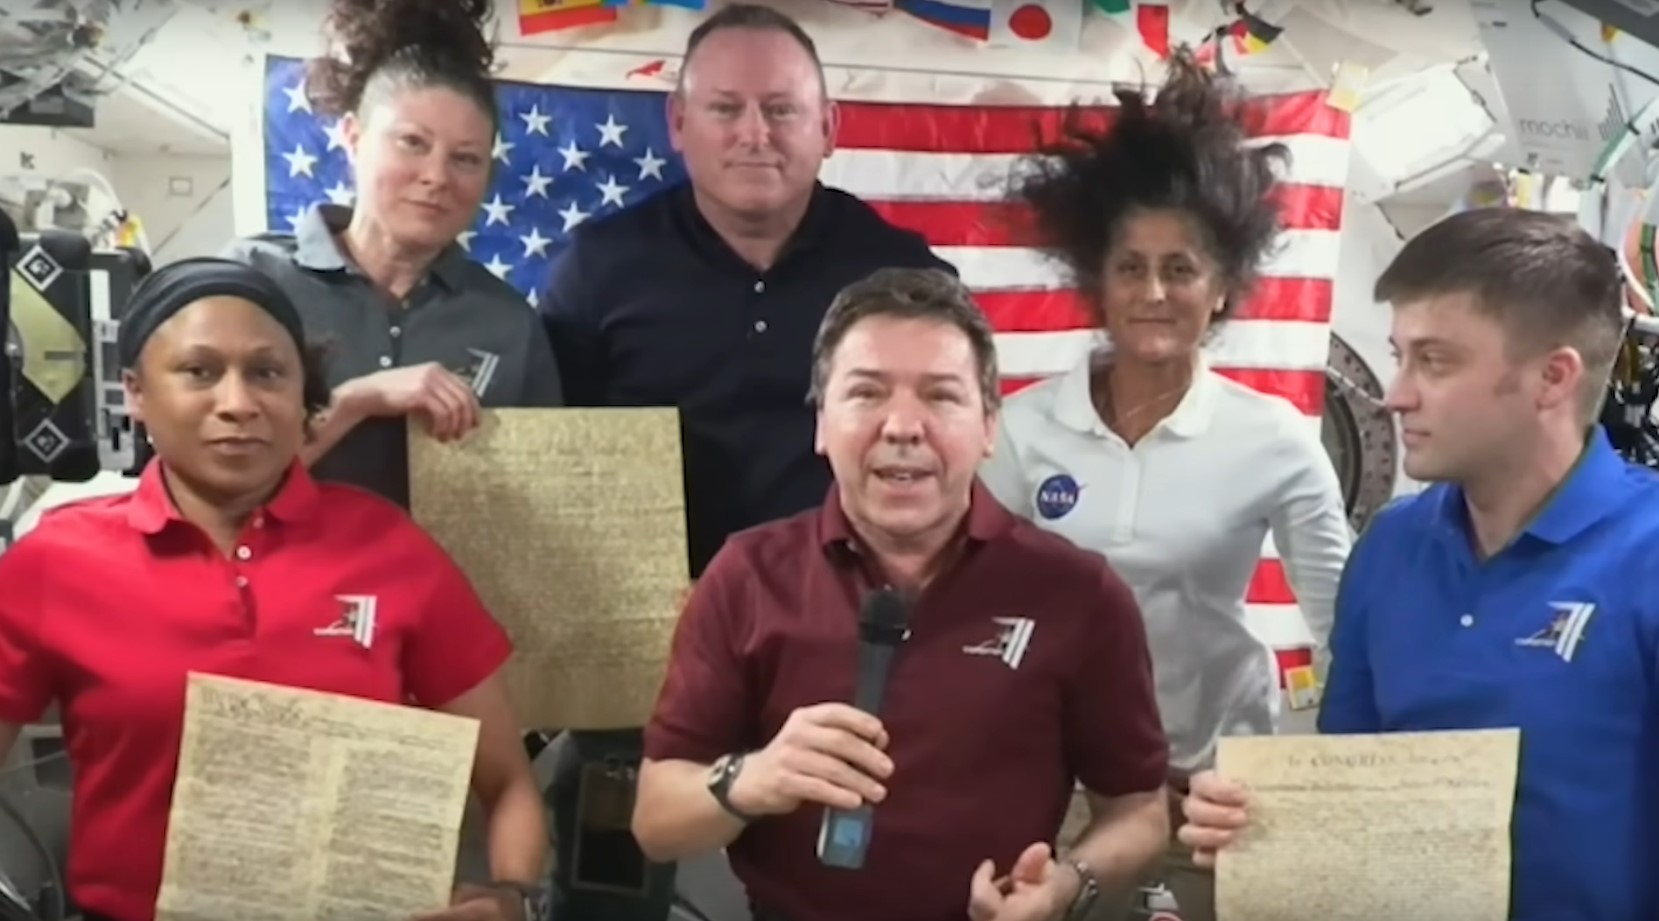 NASA astronauts on the ISS send a Fourth of July message.